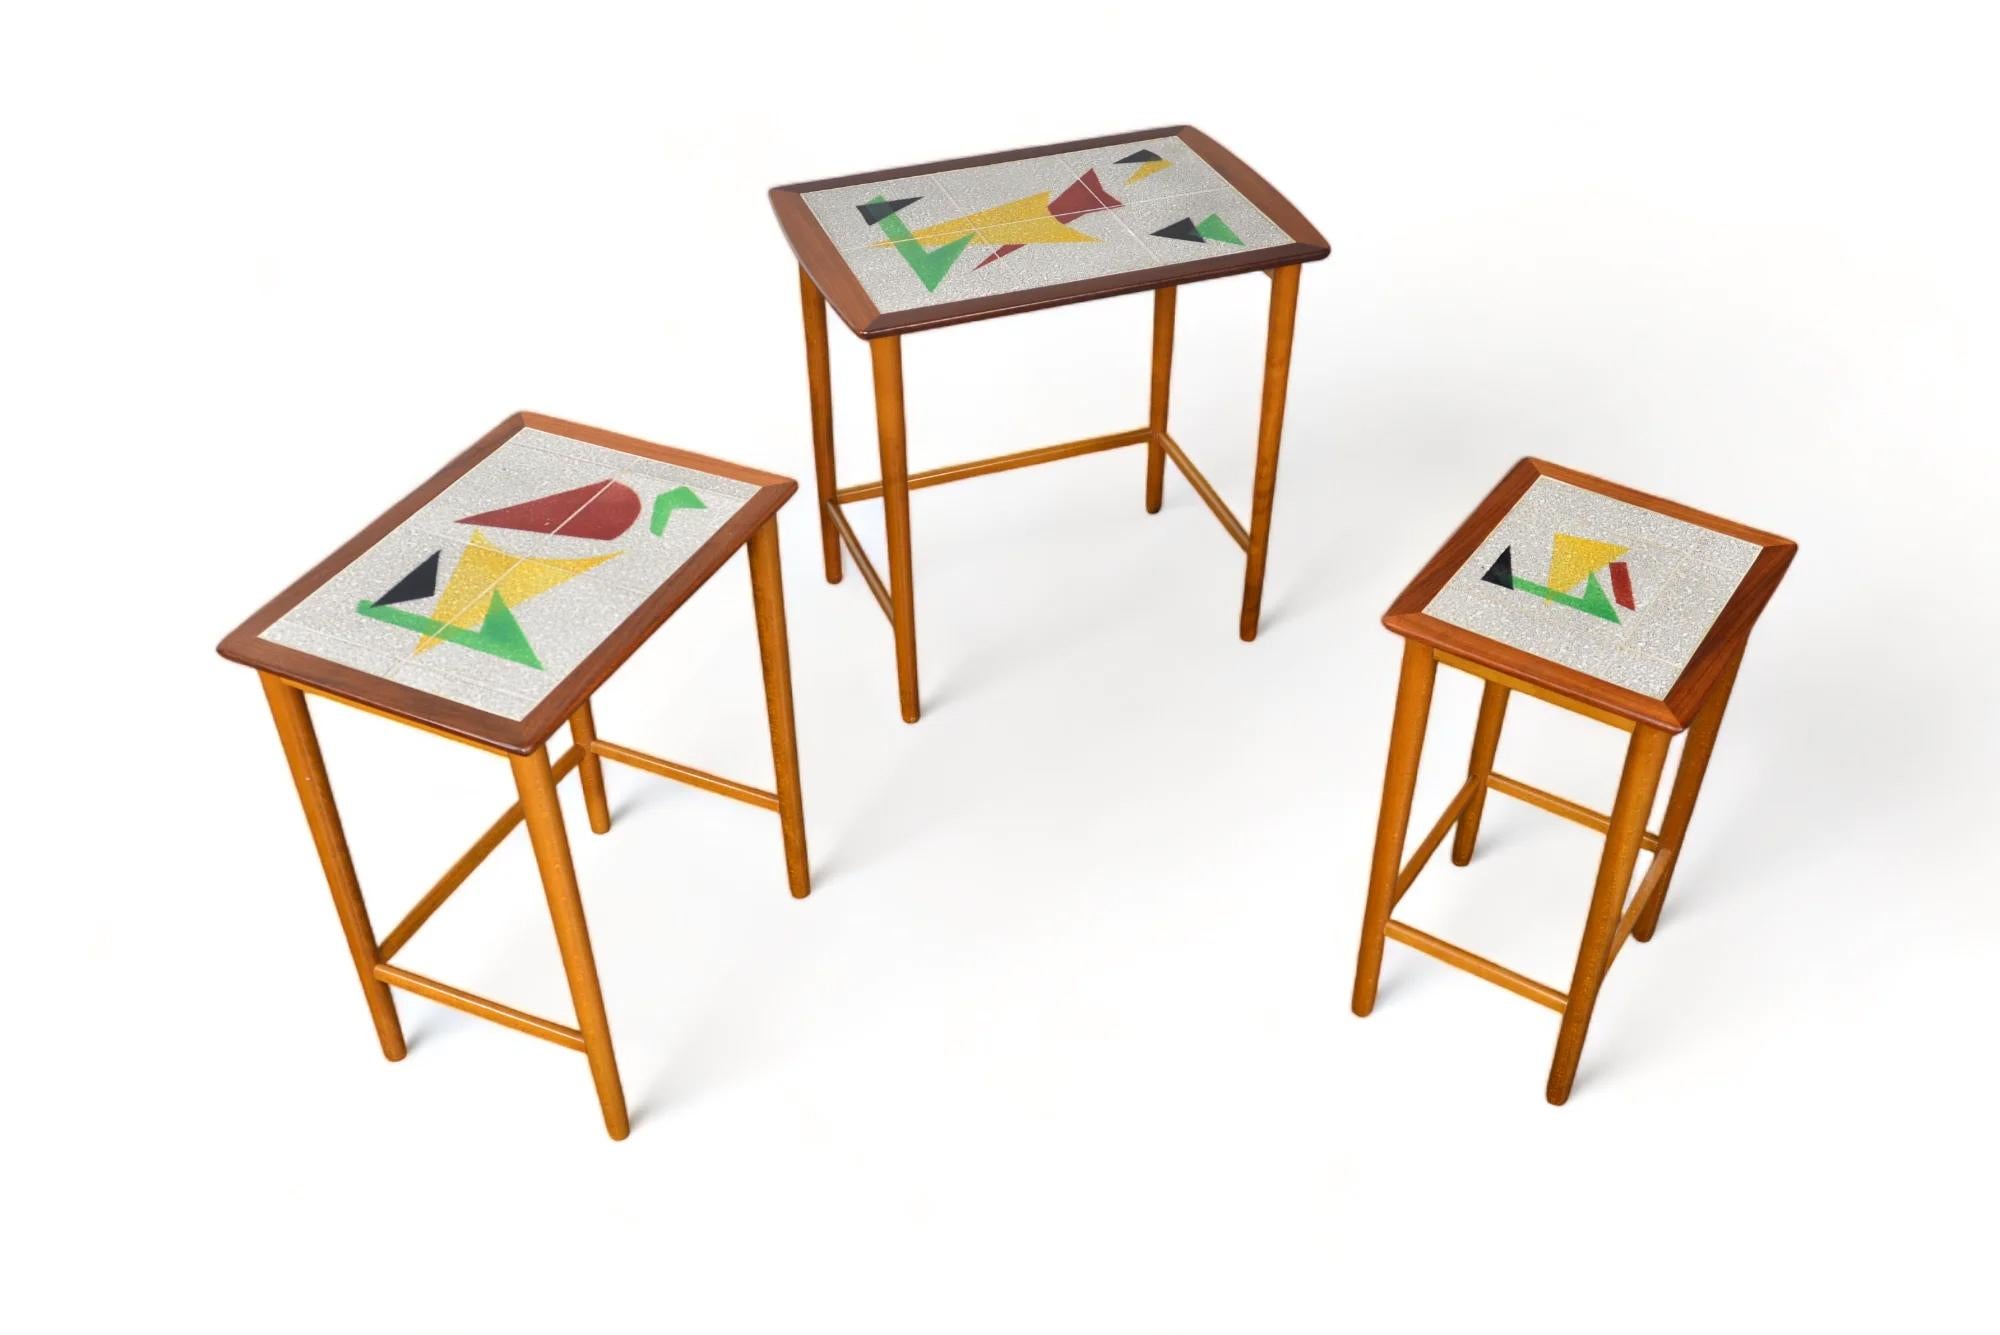 20th Century Set Of Atomic Teak Nesting Table With Tile Tops